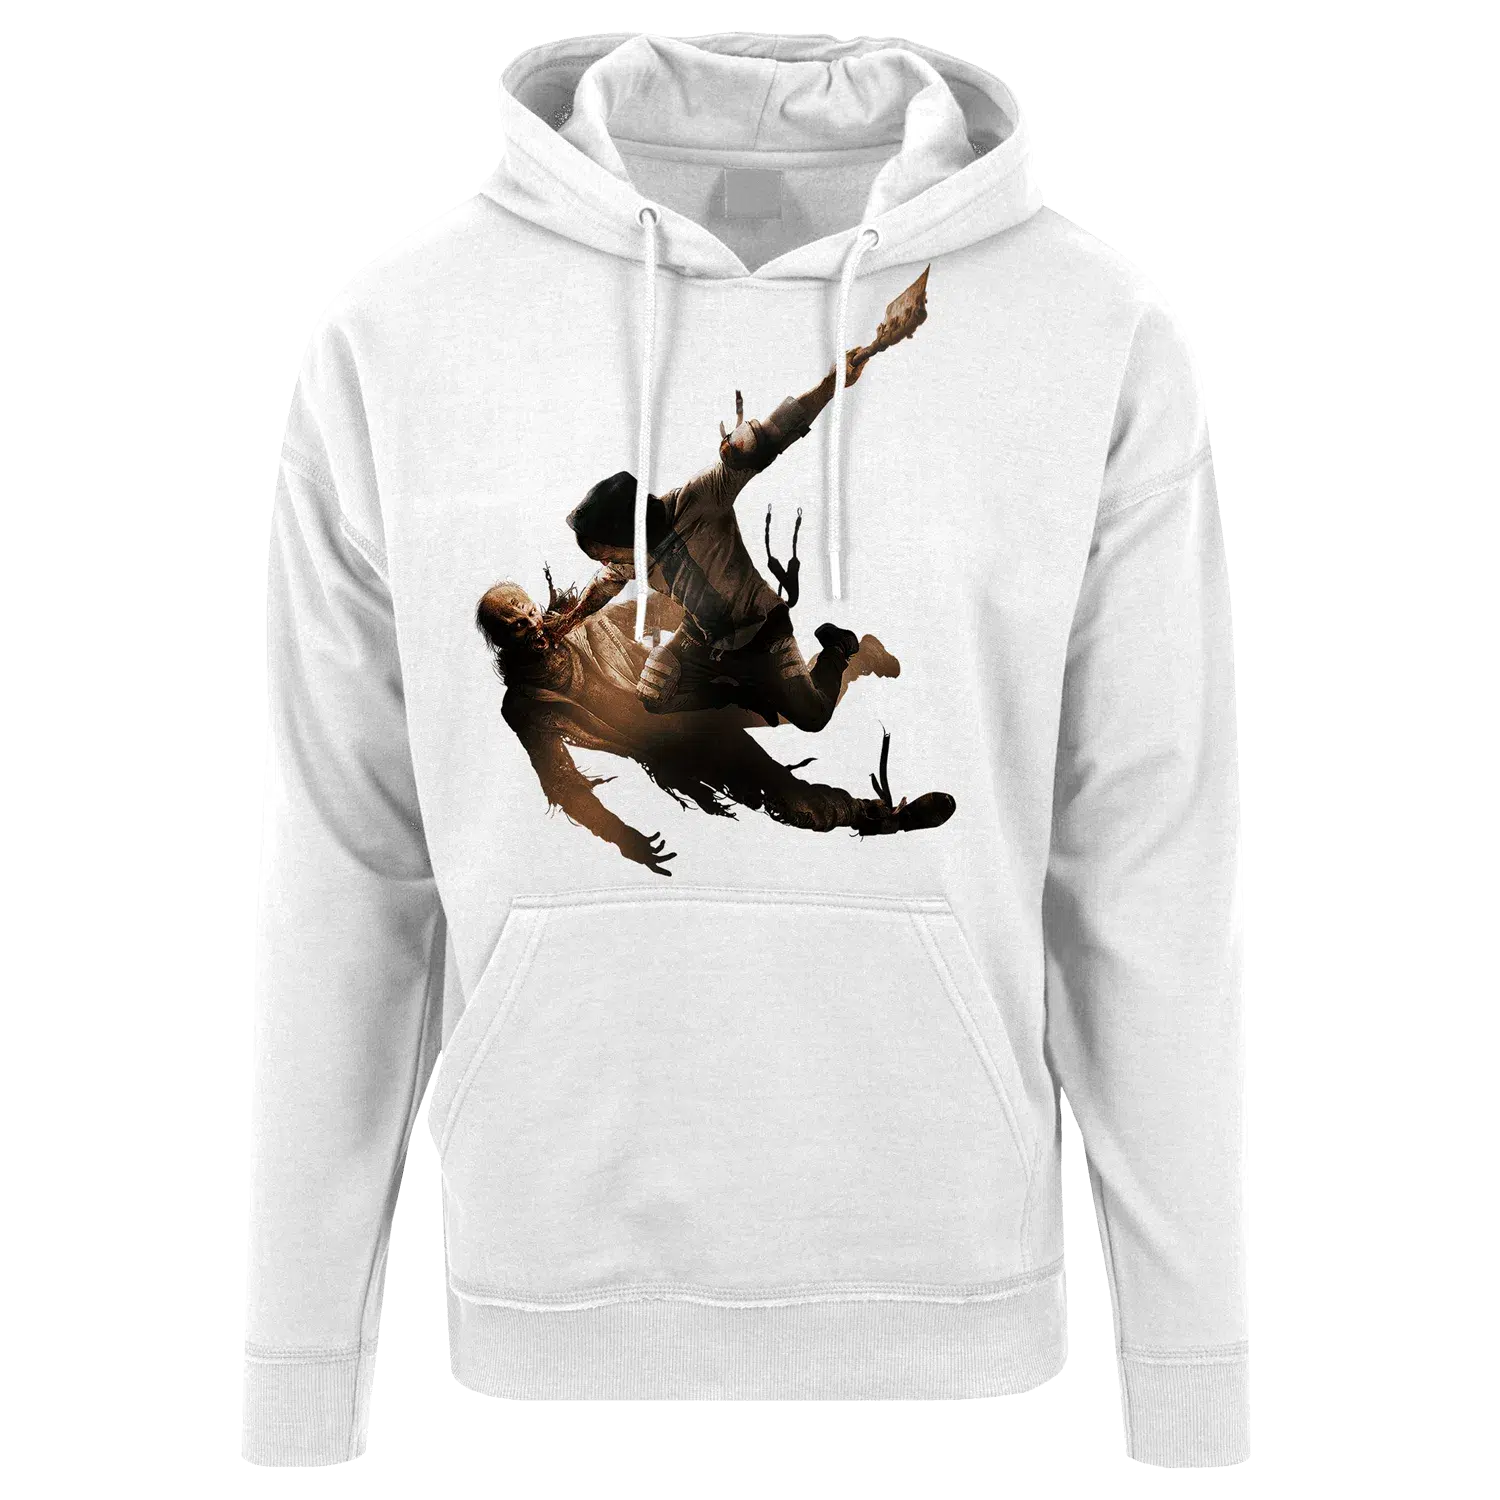 Dying Light 2 Hoodie "Aiden Caldwell"